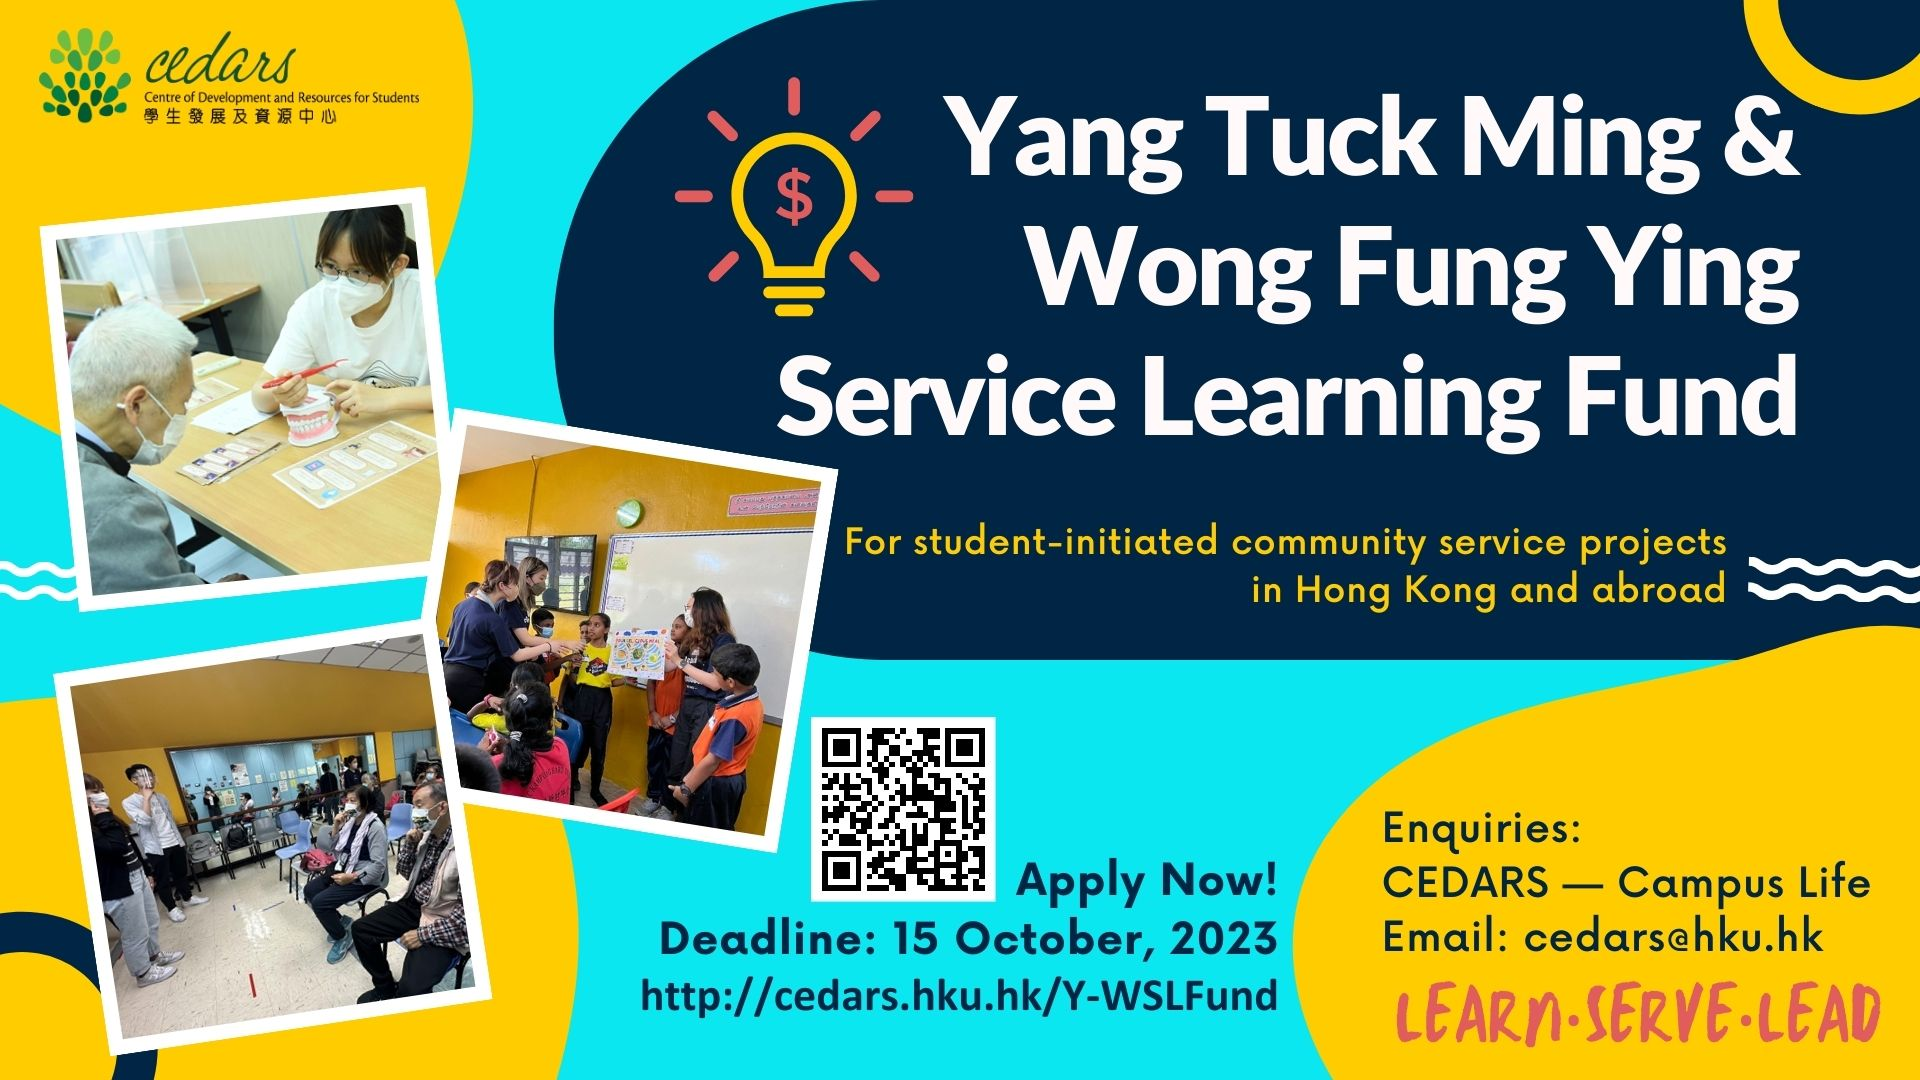 Yang Tuck Ming & Wong Fund Ying Service Learning Fund